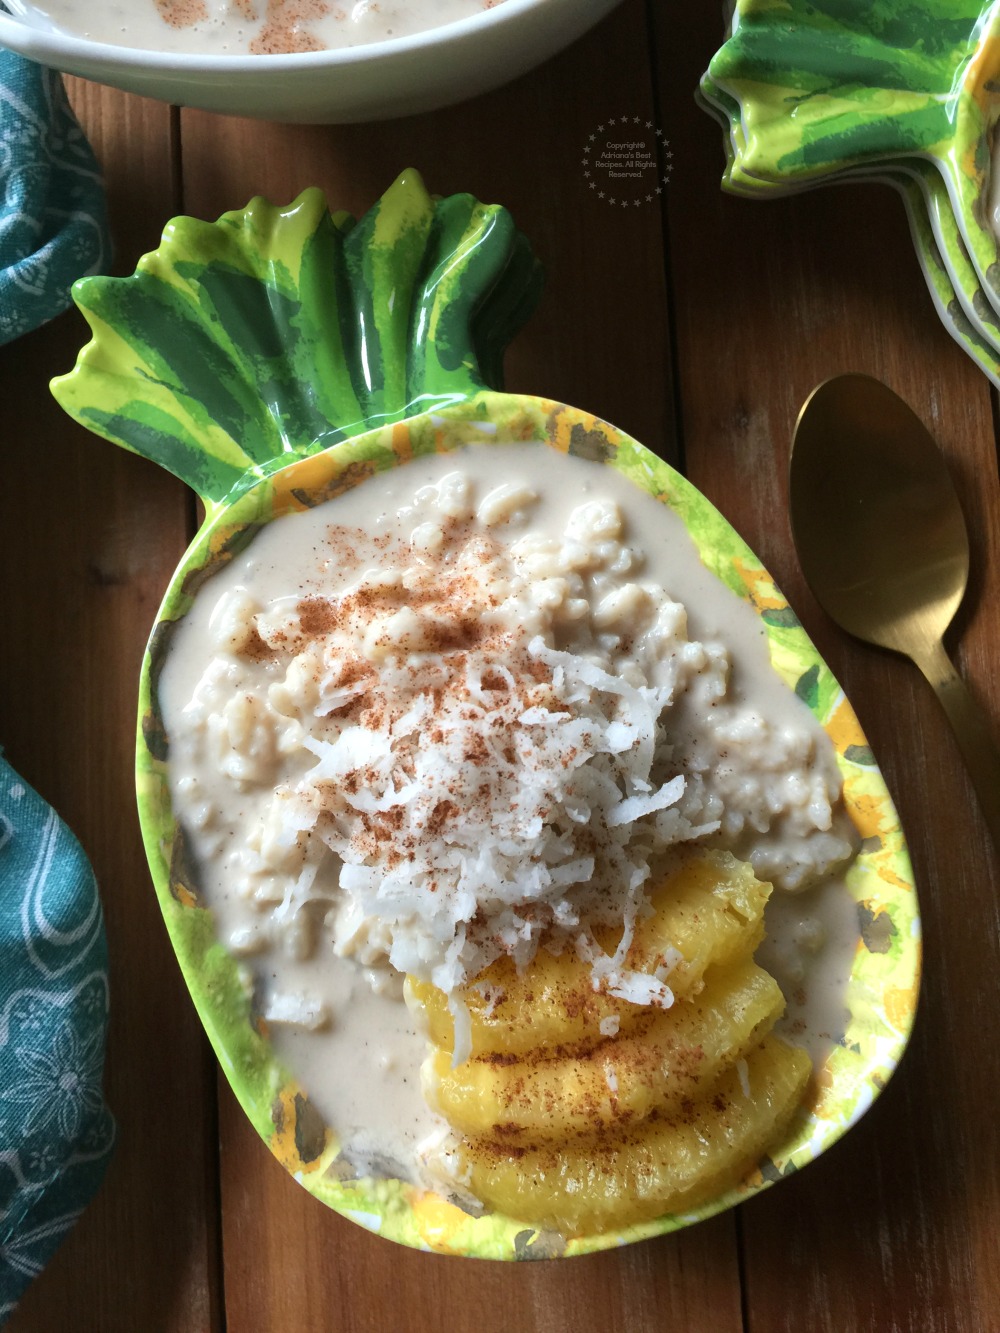 Rice pudding topped with slices of pineapple and shredded coconut  